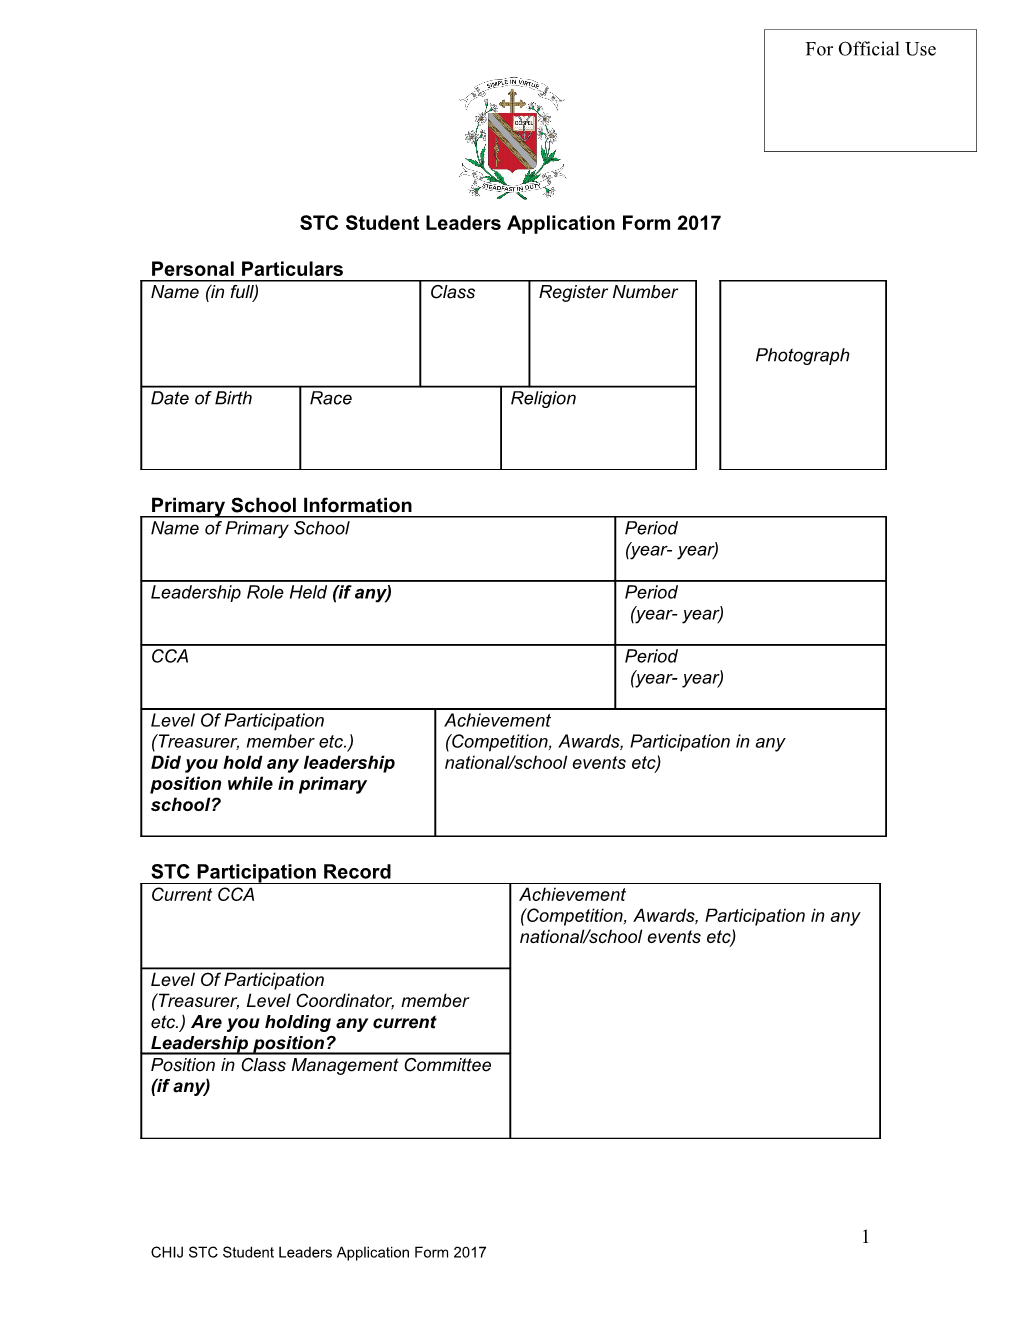 STC Student Counsellors Application Form (2006)